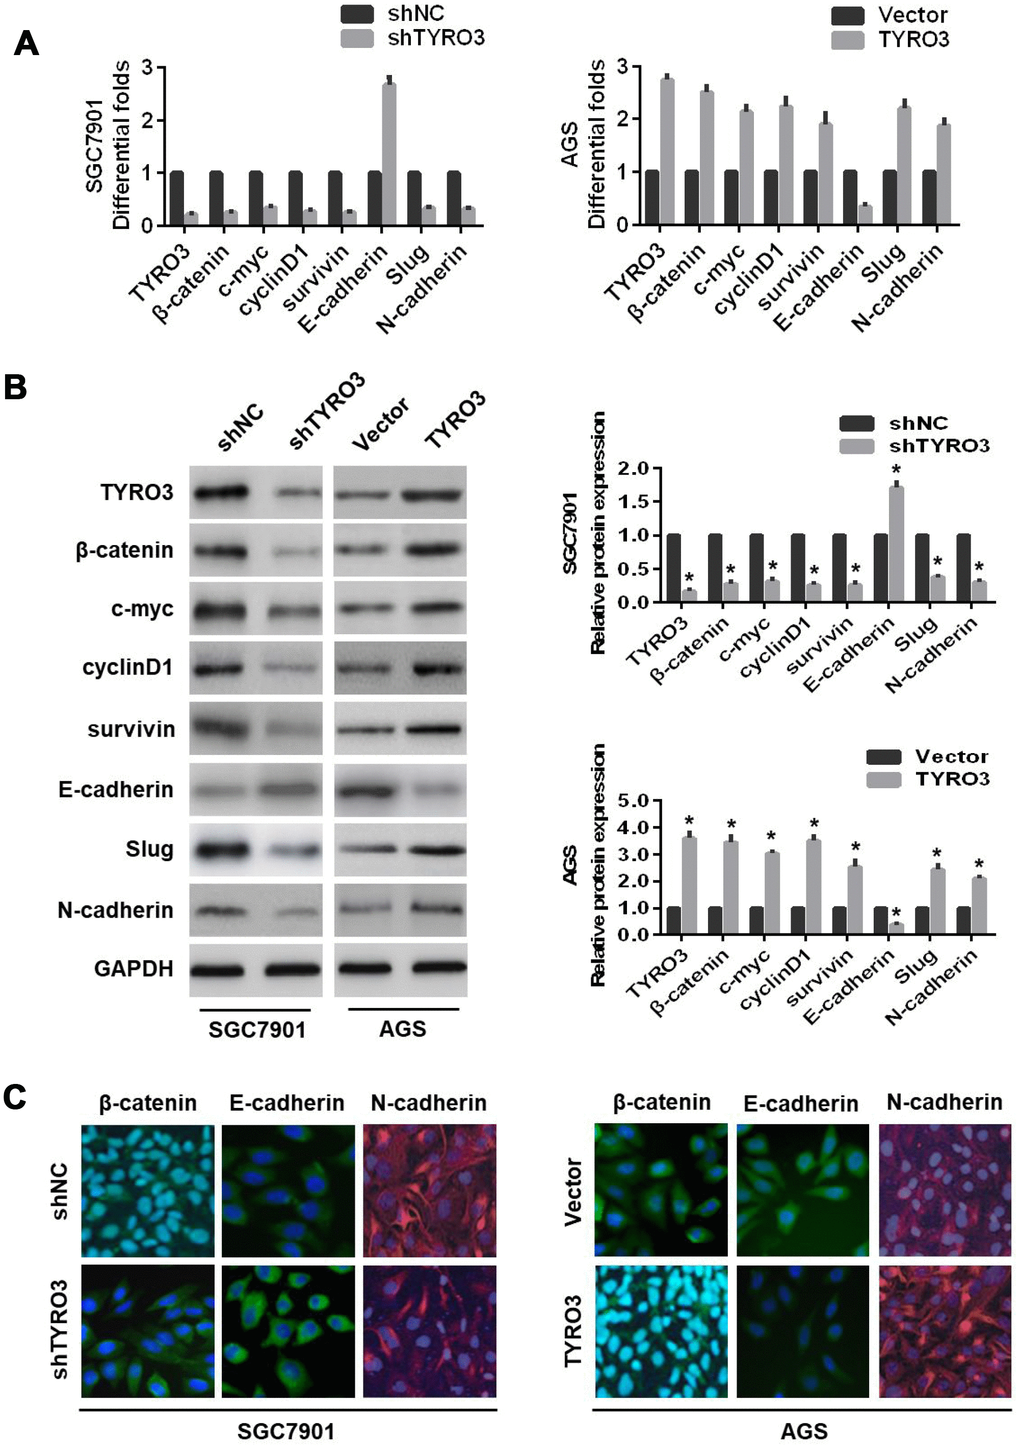 The effects of TYRO3 knockdown or overexpression on the epithelial-mesenchymal transition and Wnt/β-catenin signaling-related markers in gastric cancer (GC) cells. Following TYRO3 shRNA or overexpression treatment, (A) qRT-PCR, (B) western blotting, and (C) immunofluorescence detection of the indicated expression levels (TYRO3, β-catenin, c-myc, cyclinD1, survivin, E-cadherin, Slug, and N-cadherin) in modified GC cells. Glyceraldehyde 3-phosphate dehydrogenase was used as a loading control. *P 